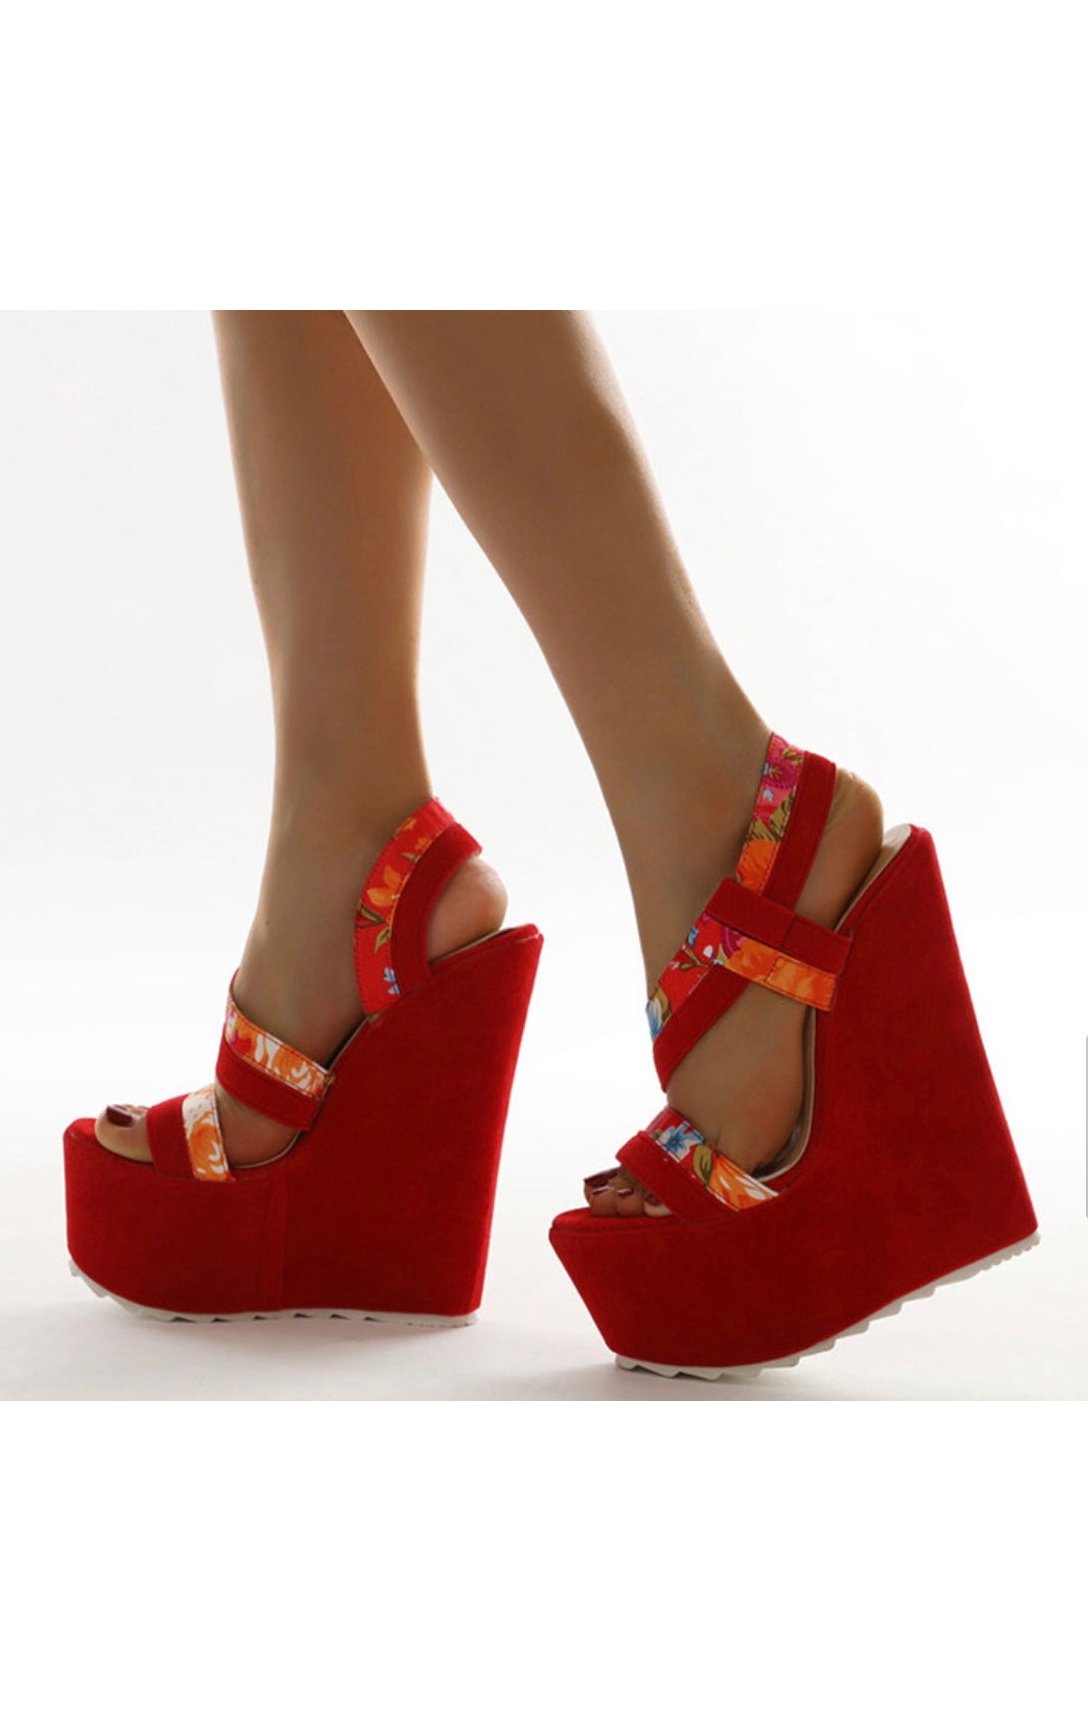 Red Floral  wedges  shoes